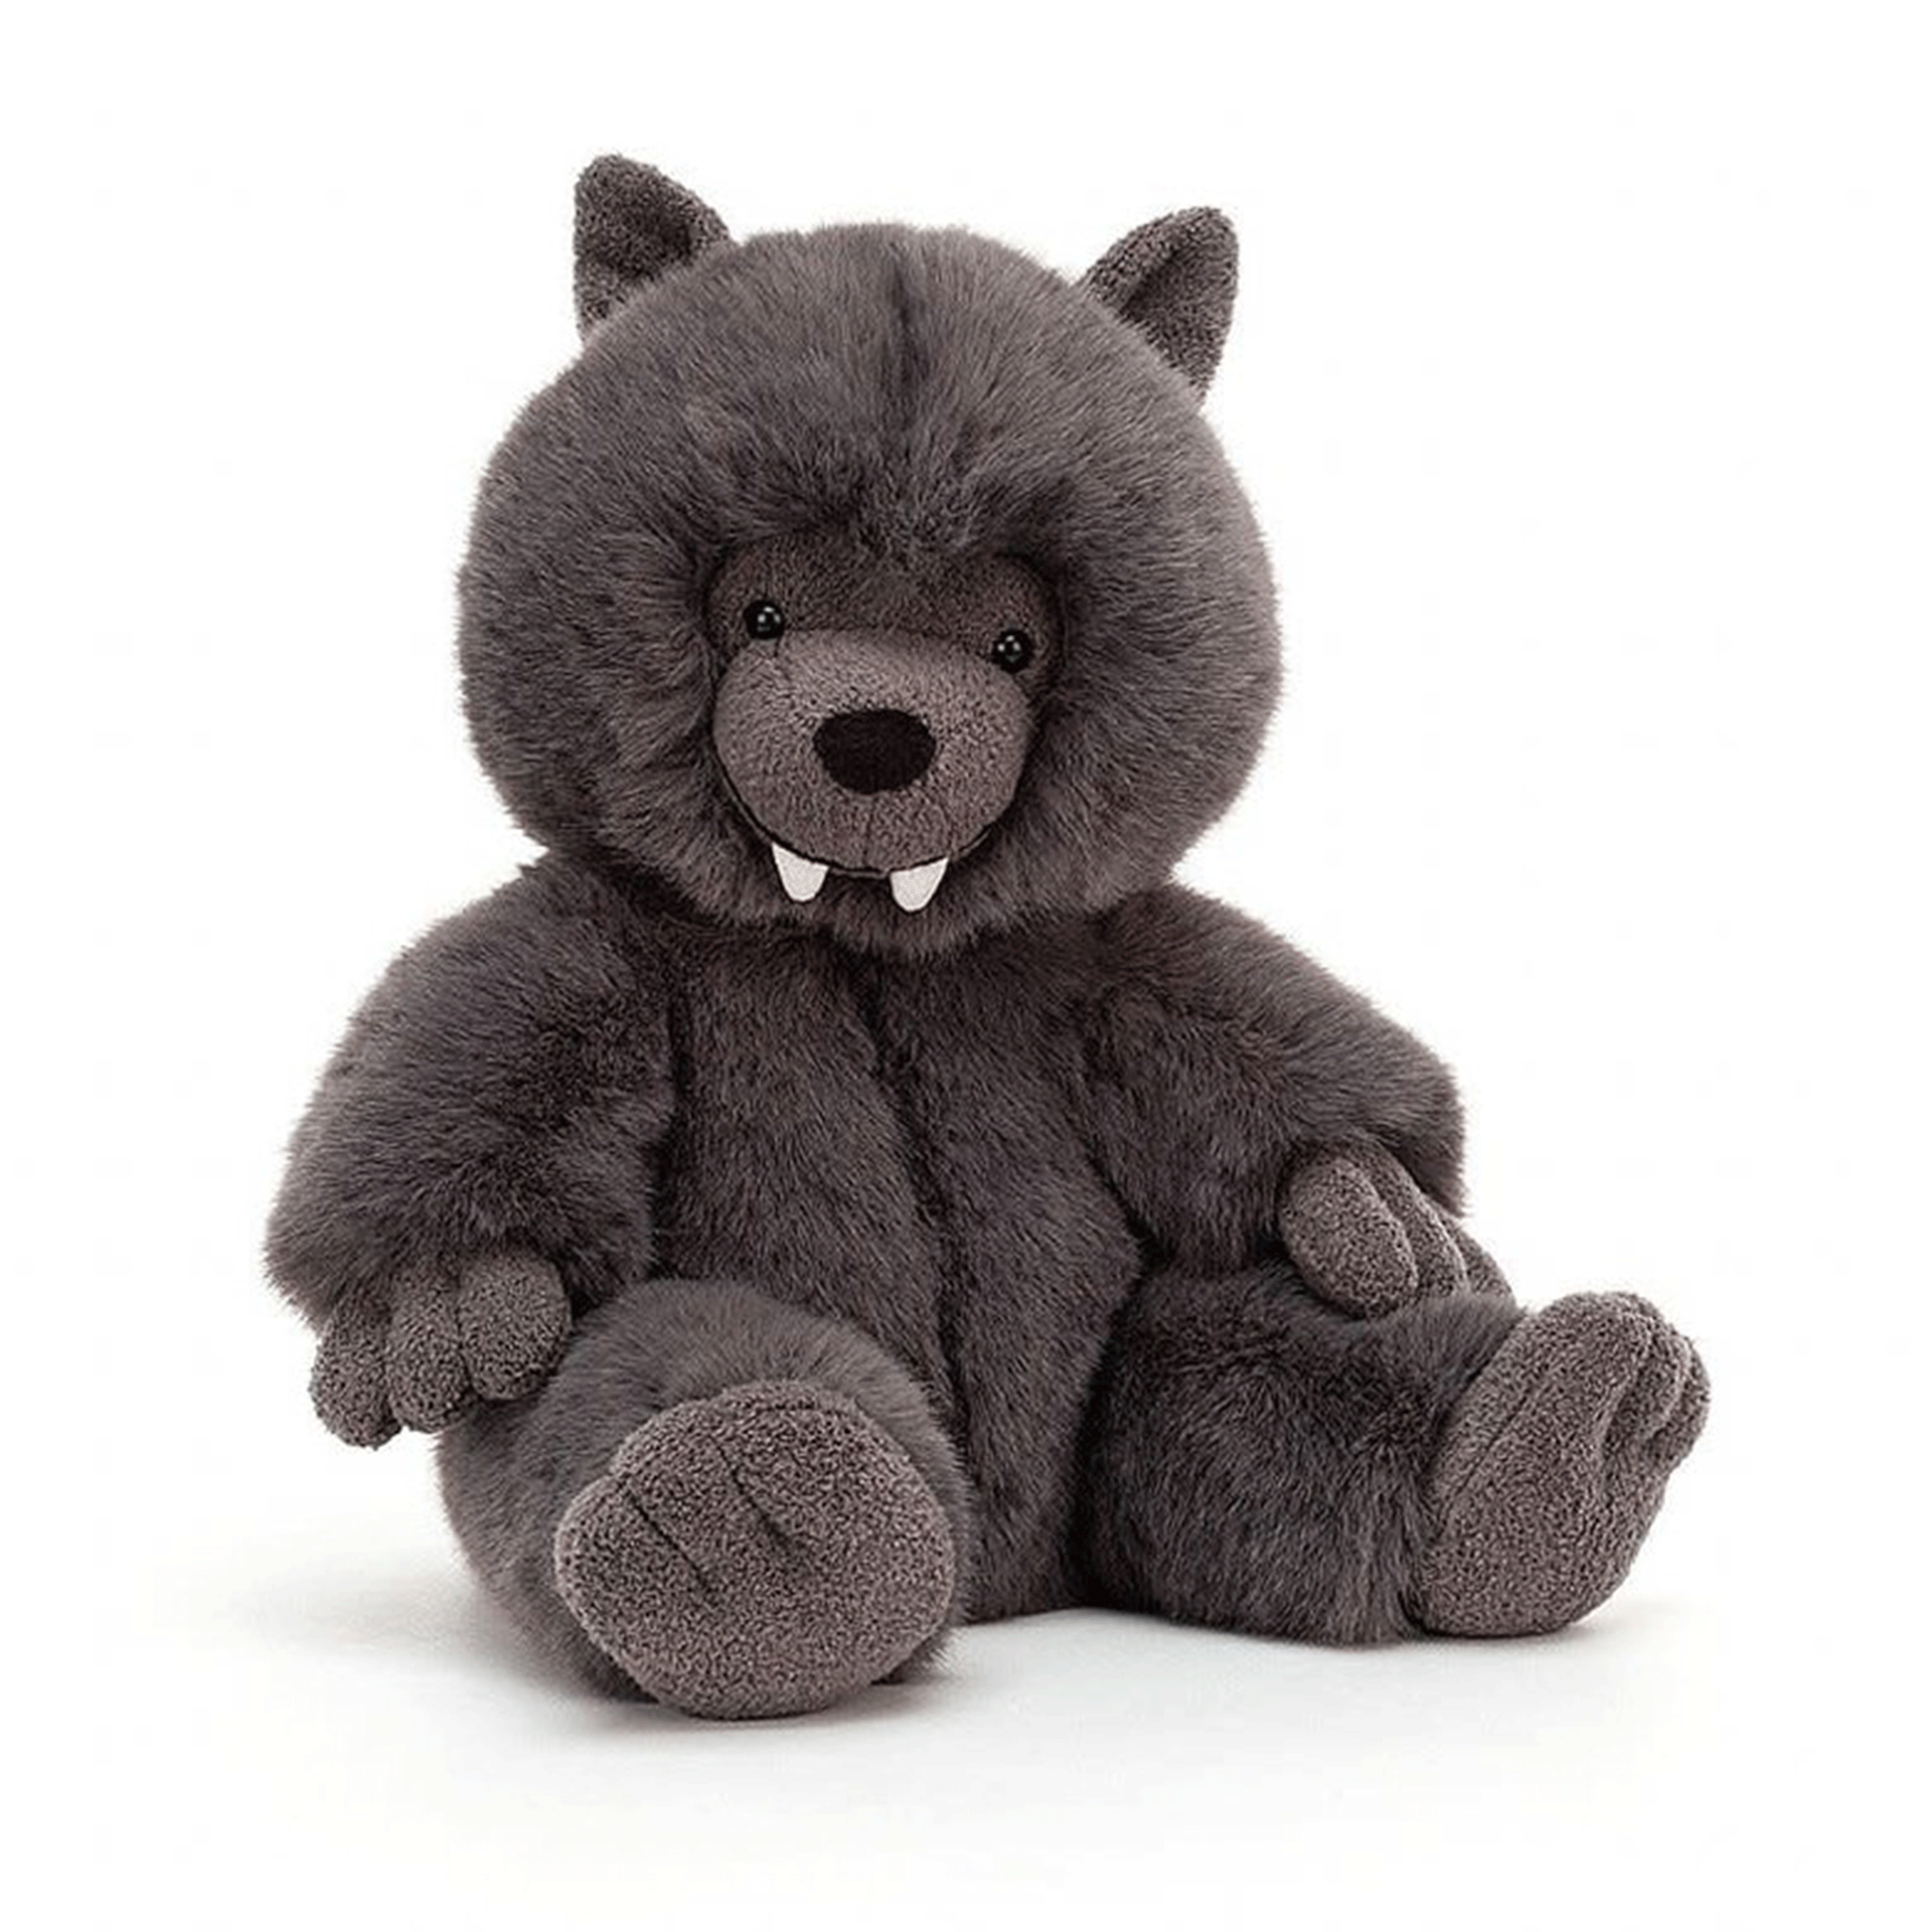 On a white background is a grey furry stuffed toy wolf with two front teeth. 